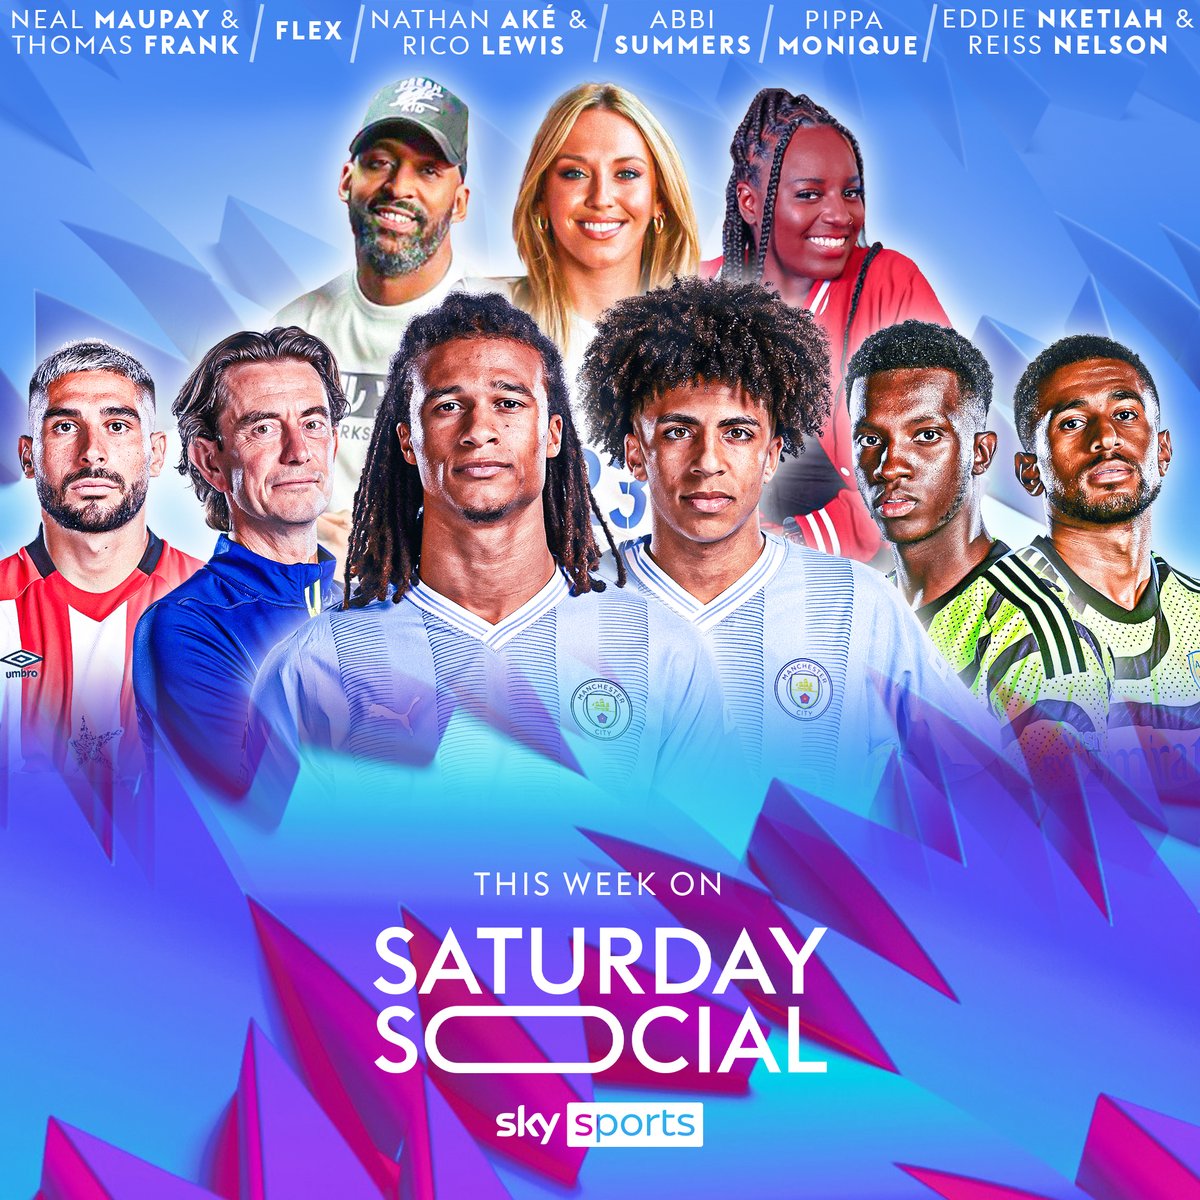 🎉 On Saturday Social this week 🎉 ⚽ Flex 🔴 Pippa Monique ⚪ Abbi Summers 🔵 Football Friends with Nathan Aké & Rico Lewis 👉 LIES with Eddie Nketiah & Reiss Nelson 🎯 Wheel of Truth with Thomas Frank & Neal Maupay ⏰ Join us at 10.30am on Sky Sports! ⏰